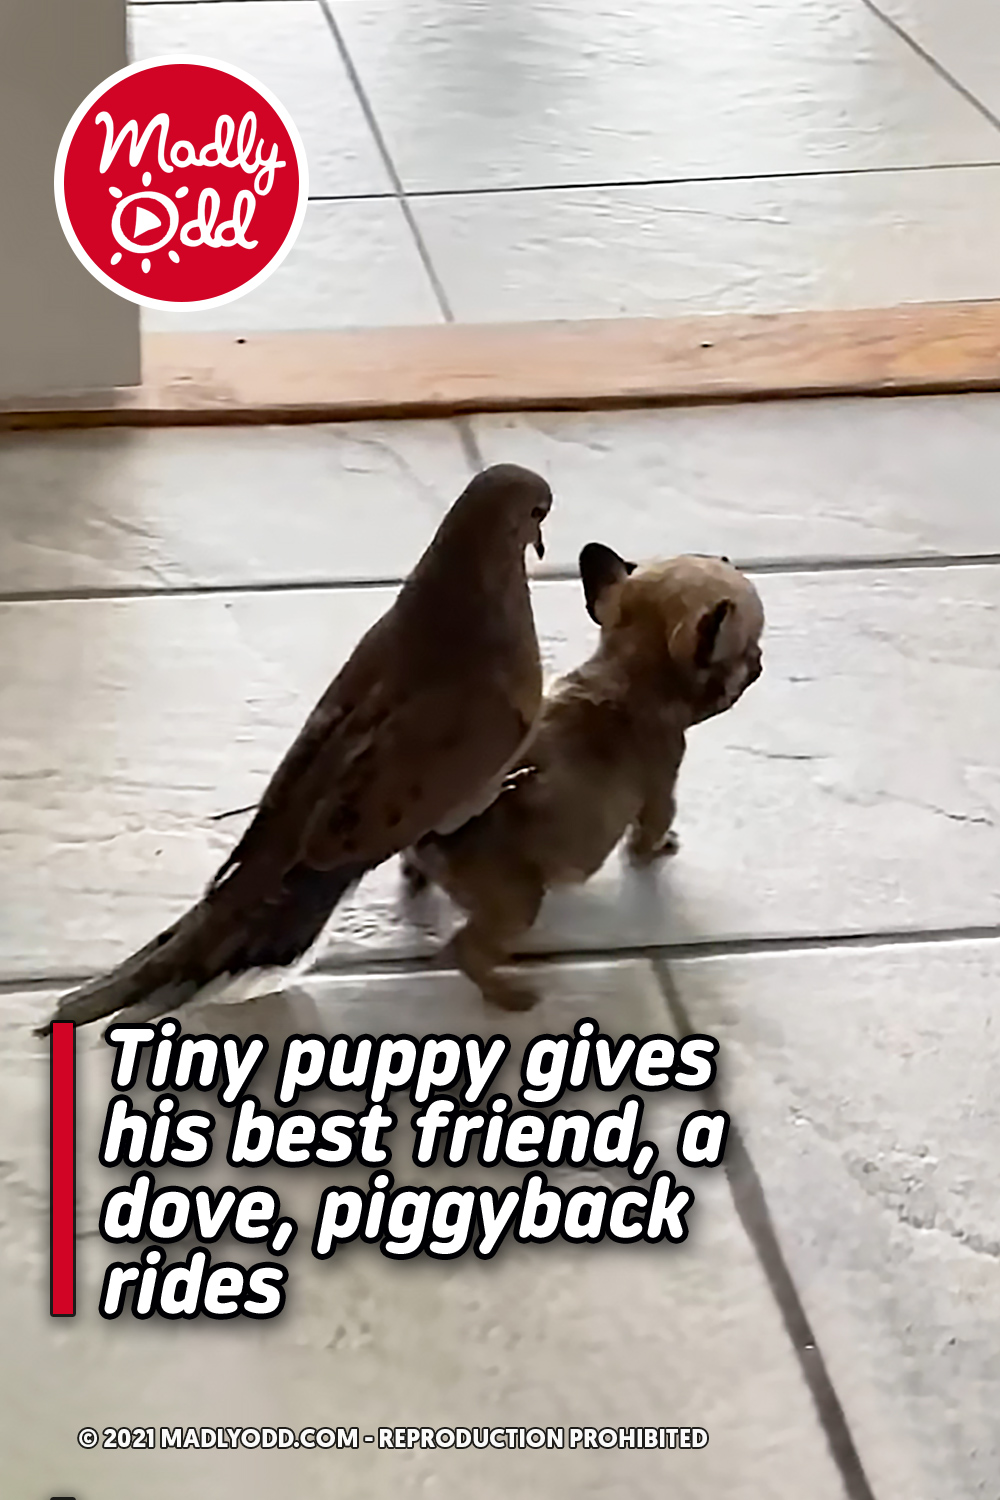 Tiny puppy gives his best friend, a dove, piggyback rides